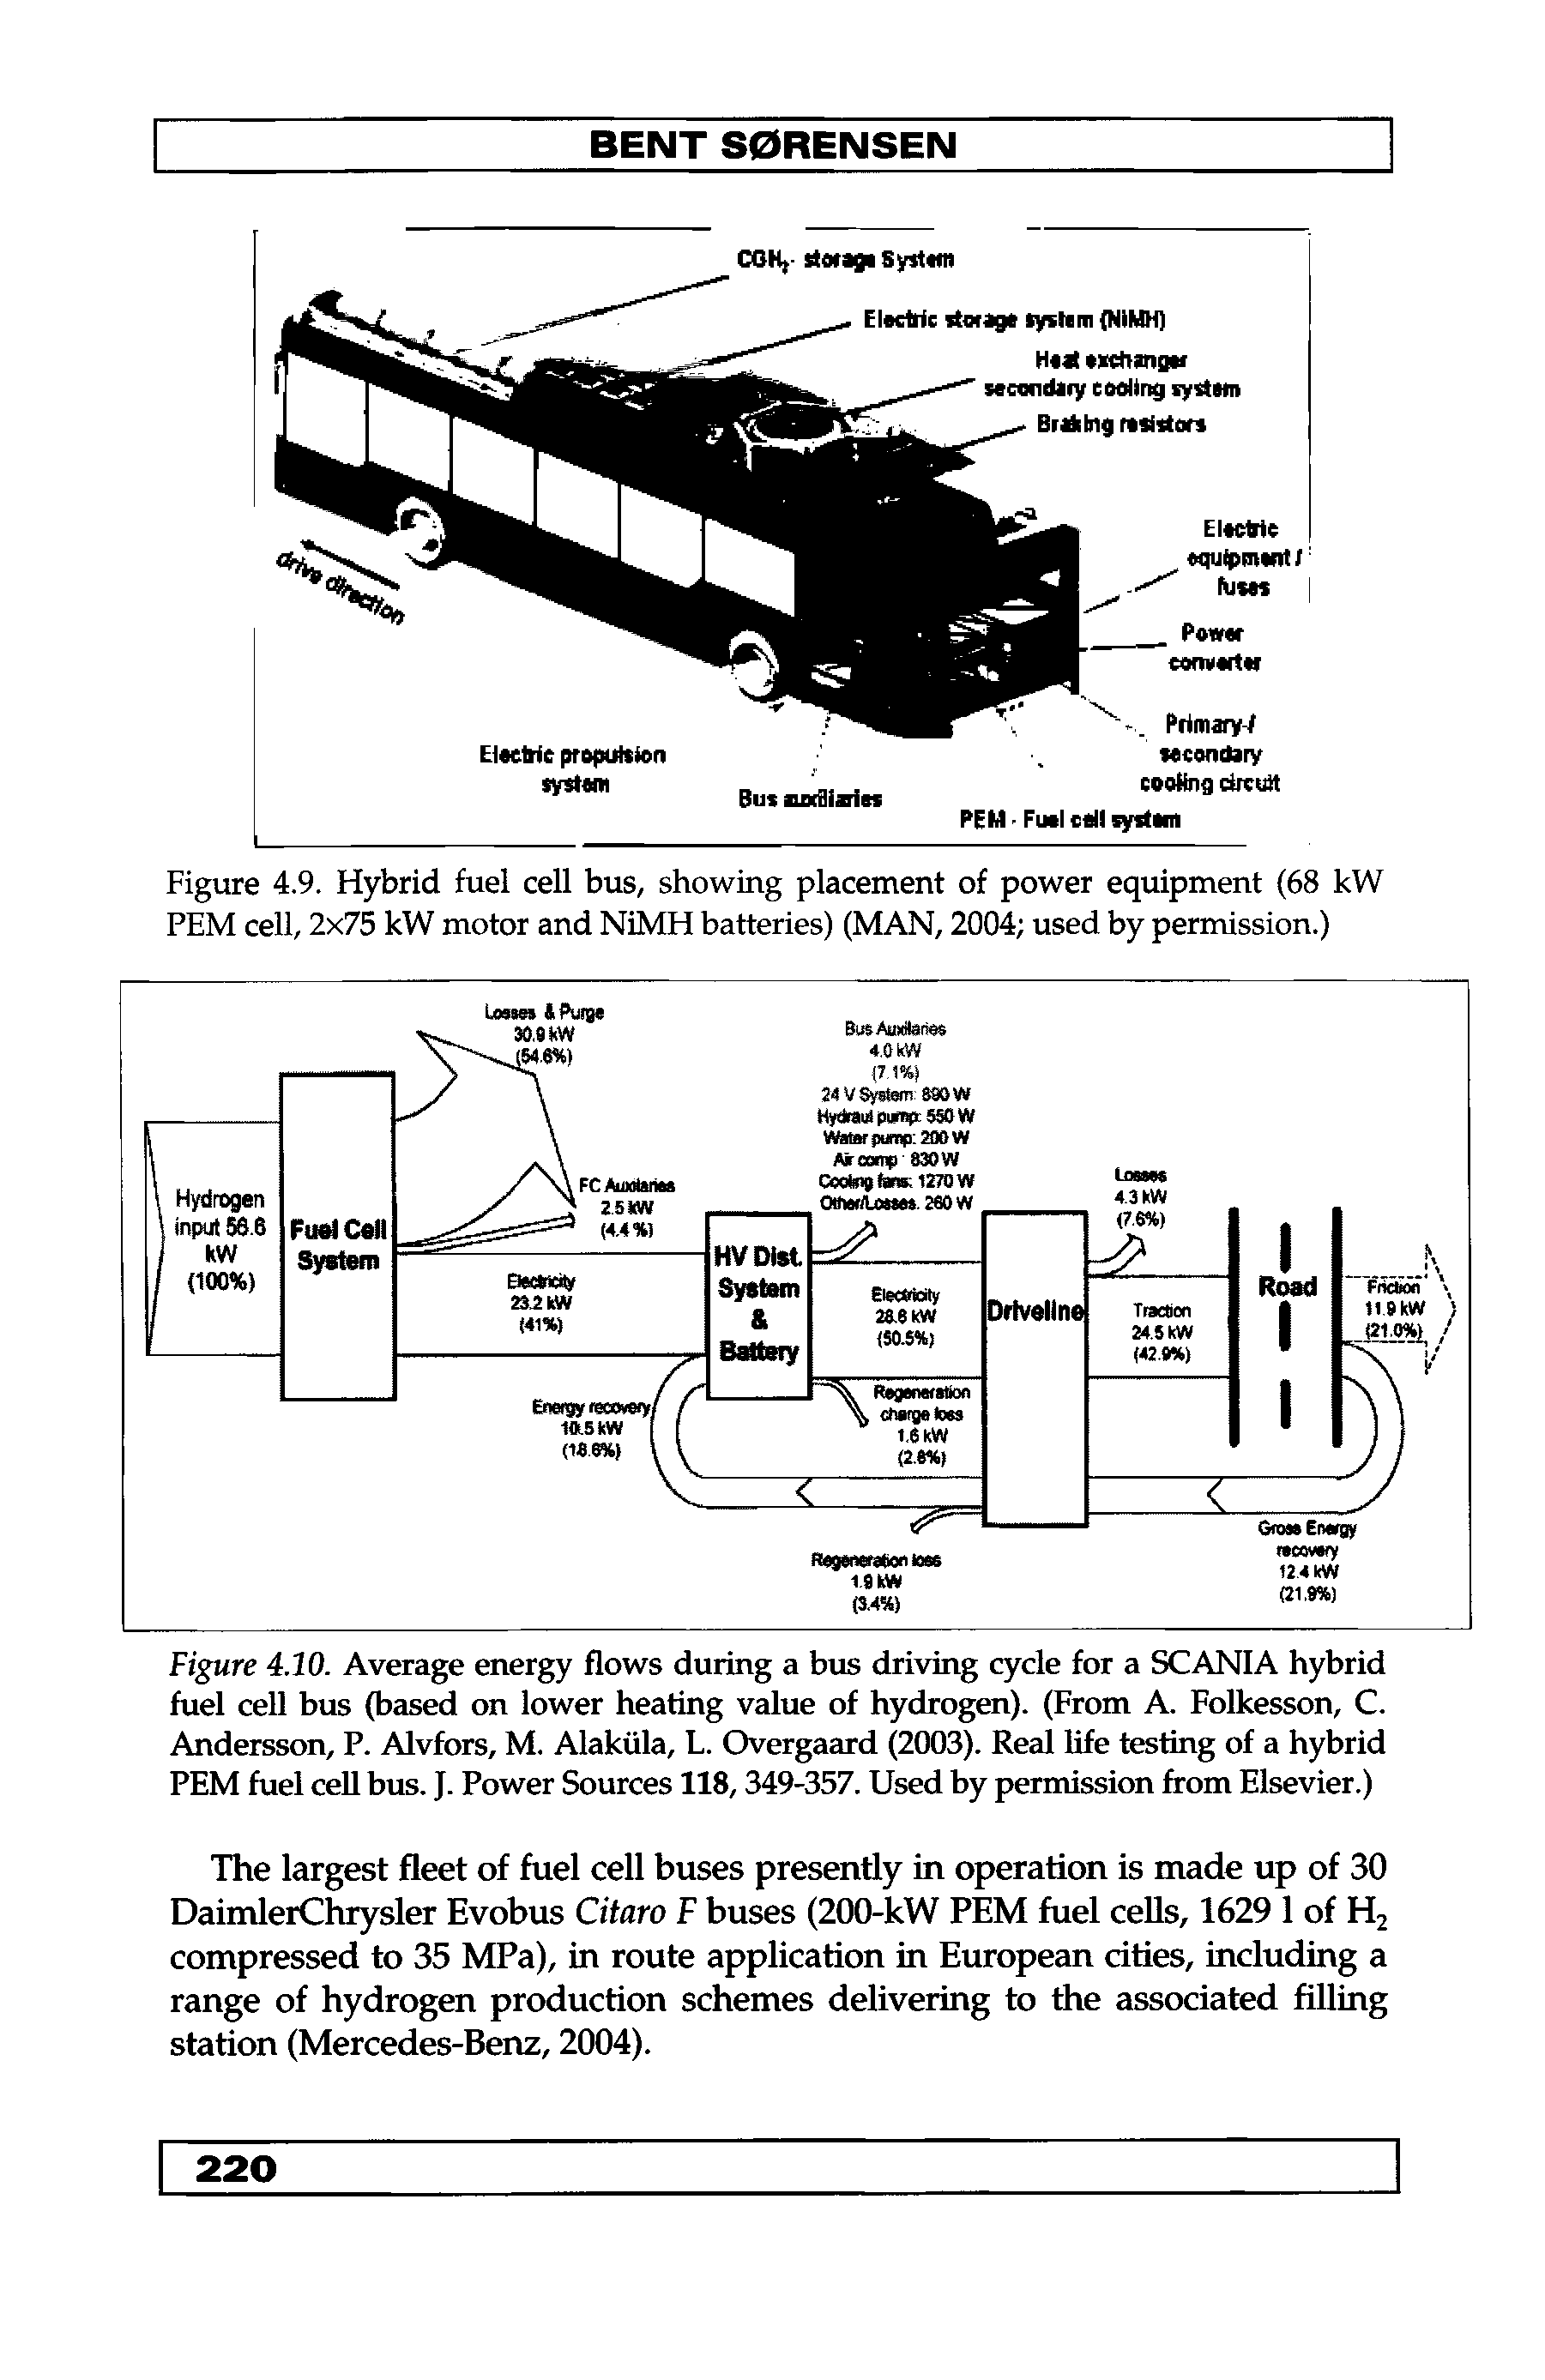 Figure 4.9. Hybrid fuel cell bus, showing placement of power equipment (68 kW PEM cell, 2x75 kW motor and NiMH batteries) (MAN, 2004 used by permission.)...